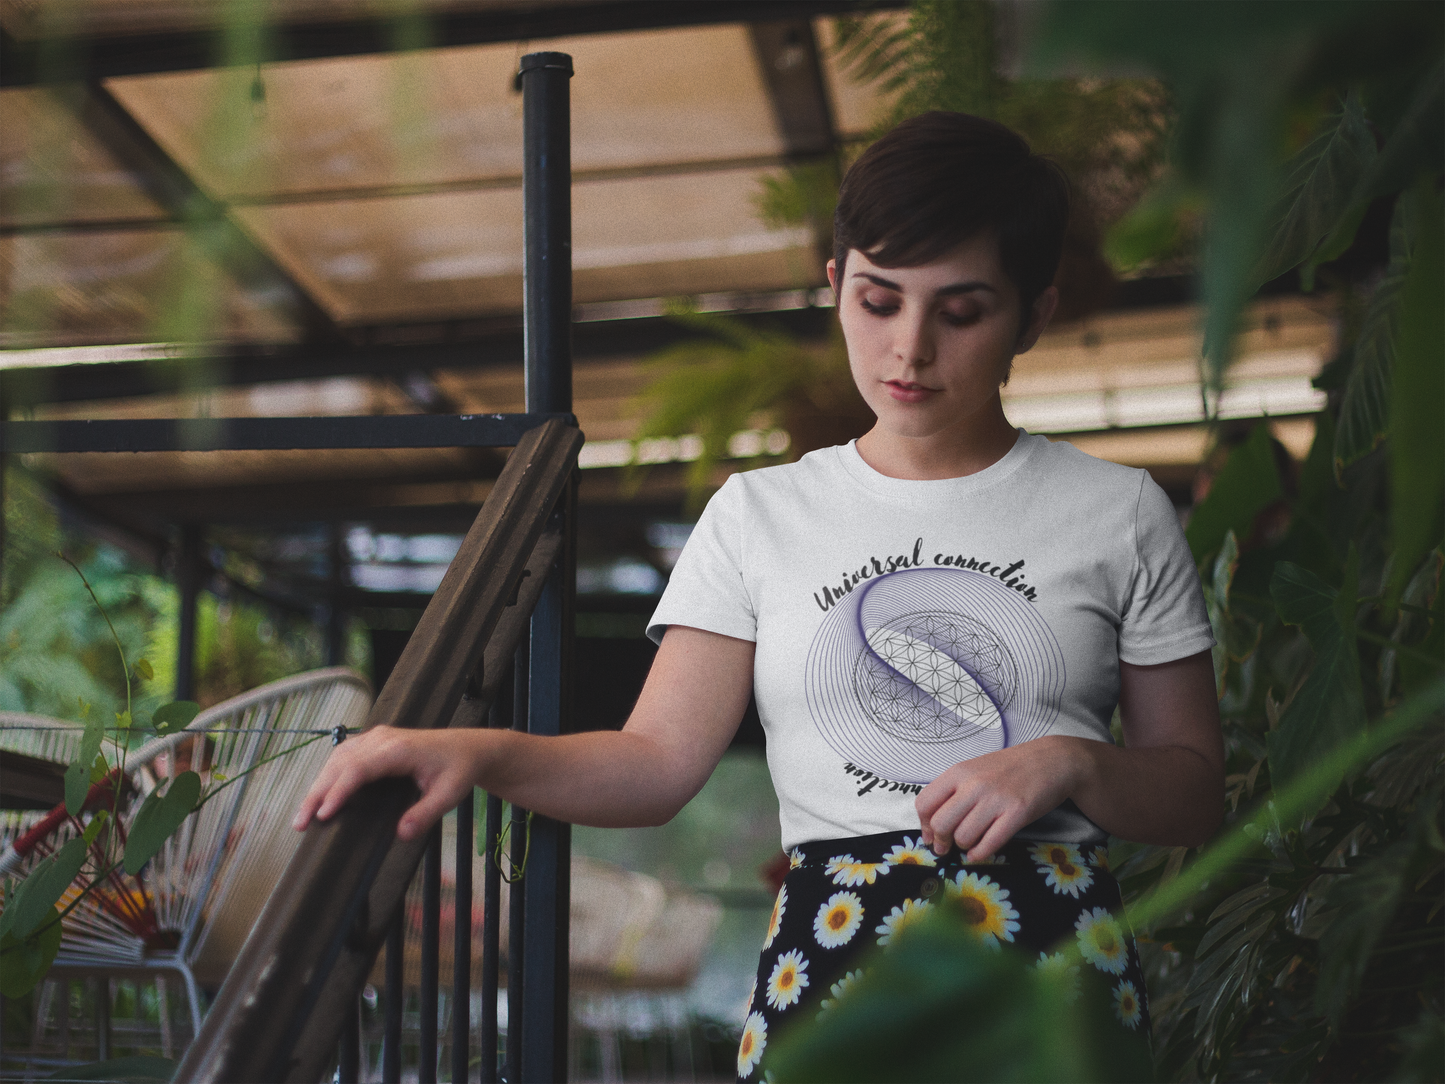 Universal Connection! Inspirational tee. 100% soft cotton